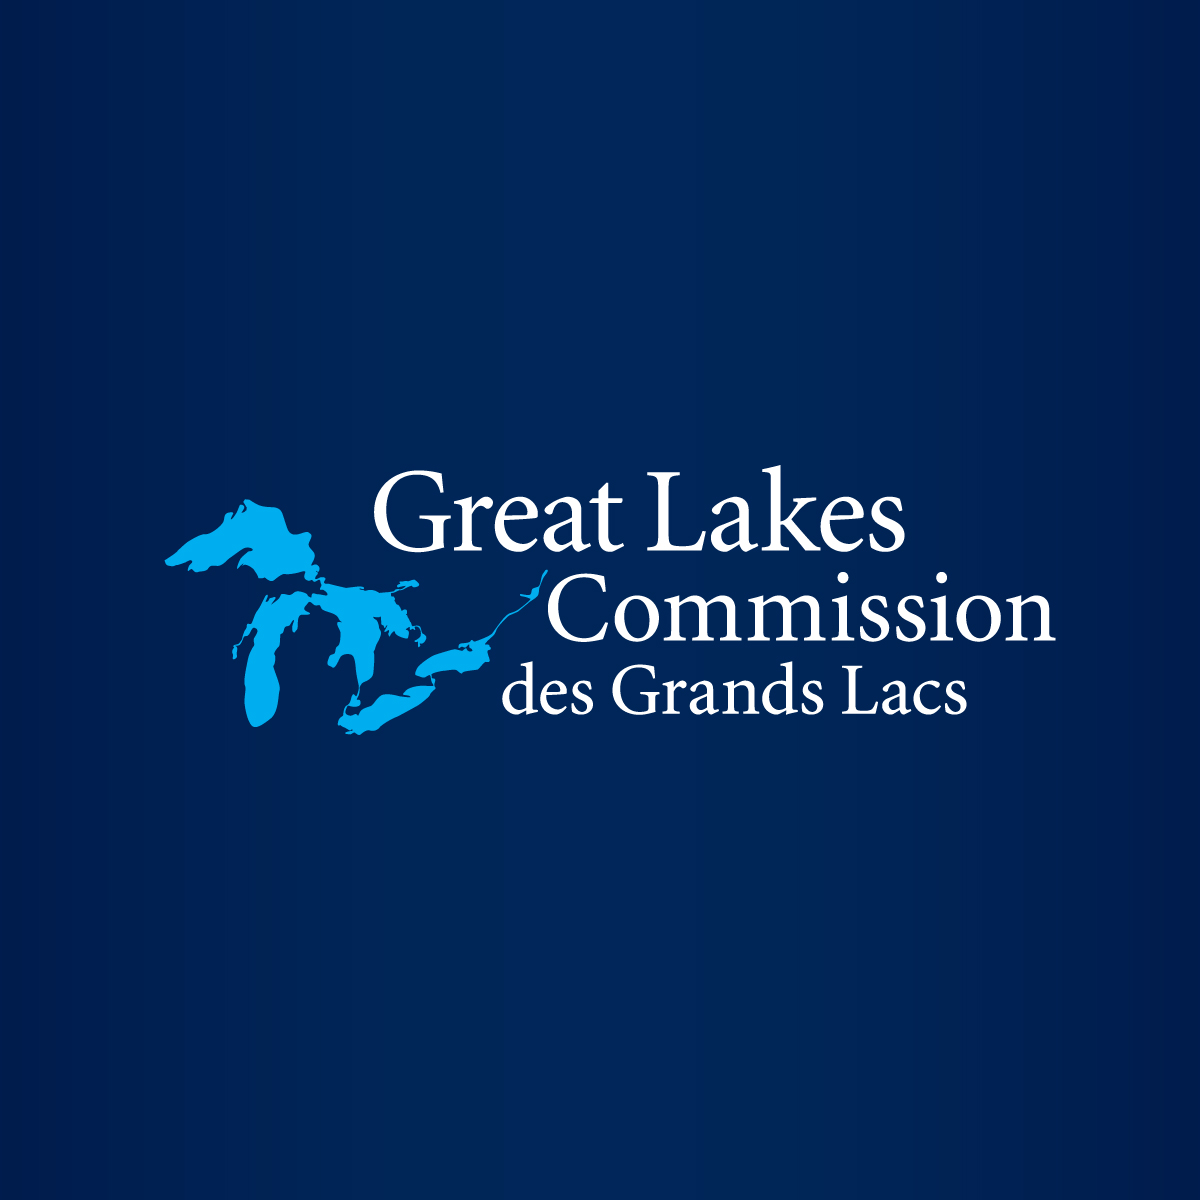 scouring superiors lake floor for great lakes shipwrecks